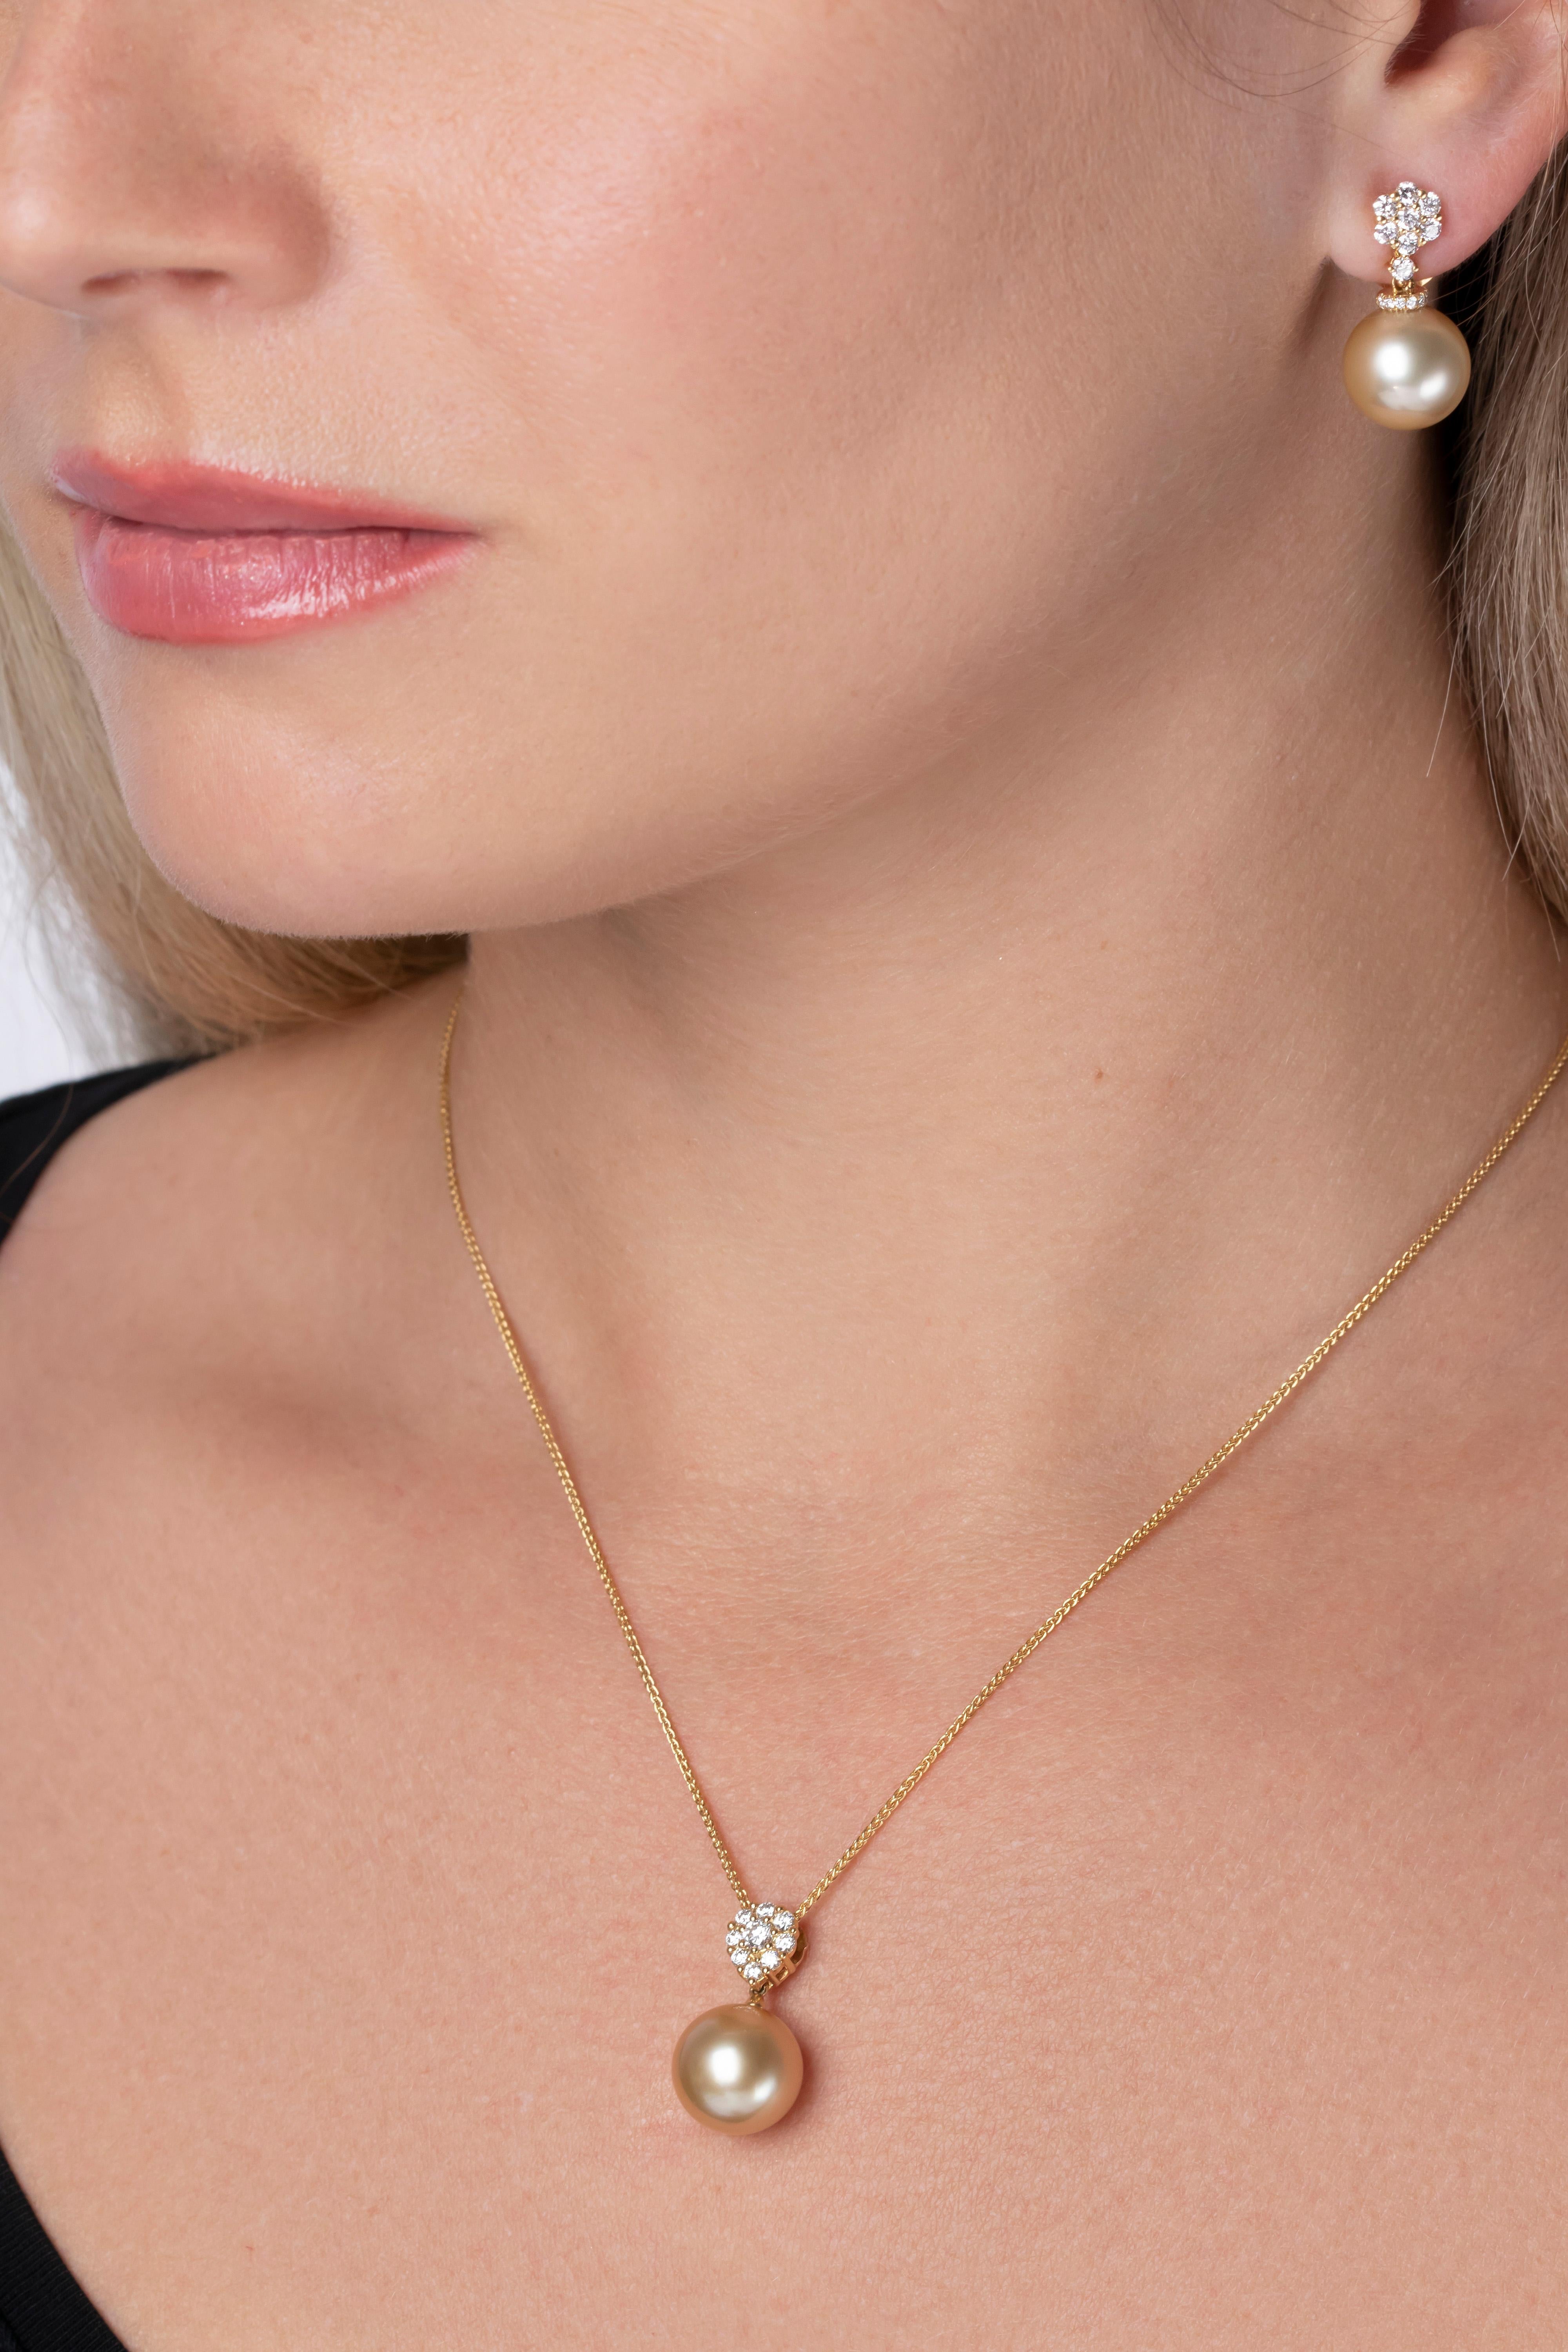 A stunning piece by Yoko London featuring a cluster of sparkling diamonds, atop a Golden South Sea pearl and diamond pendant in 18K yellow gold. Perfect for both day and evening wear, the warm tones of Golden South Sea pearls are sure to add a sense